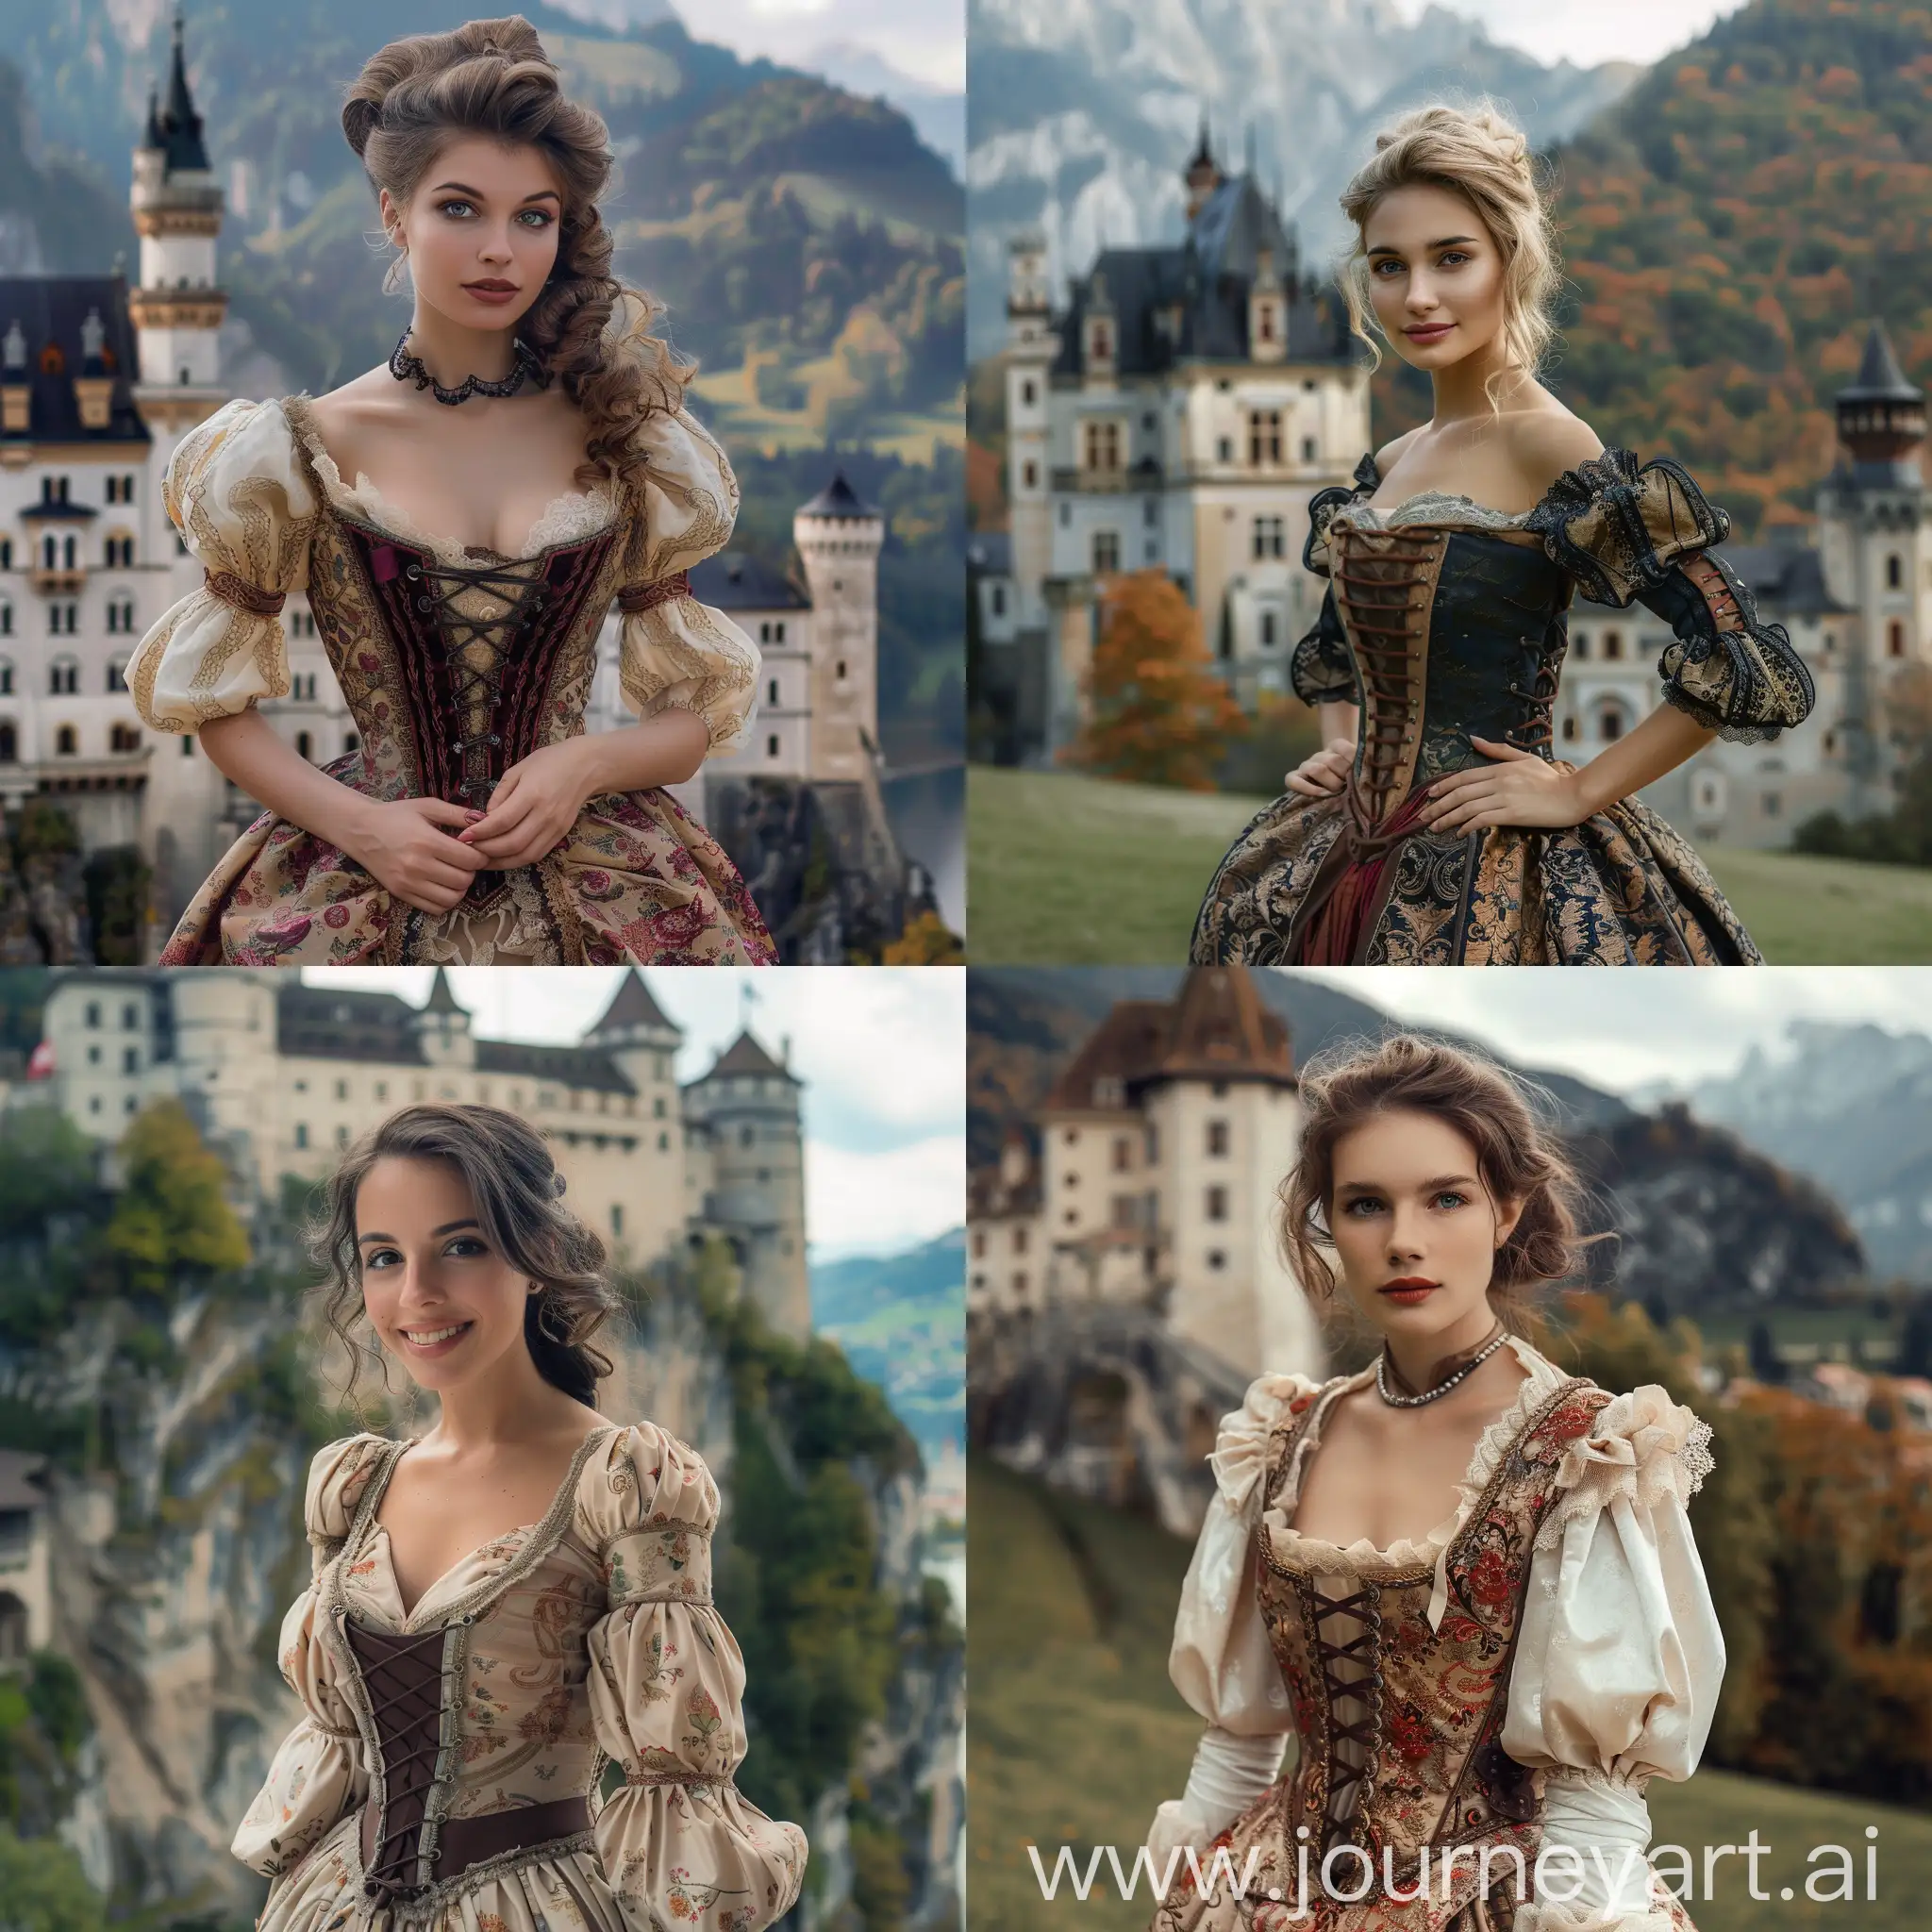 Most beautiful Switzerland lady, 20 years old, baroque dress with corset, royal Switzerland castle background